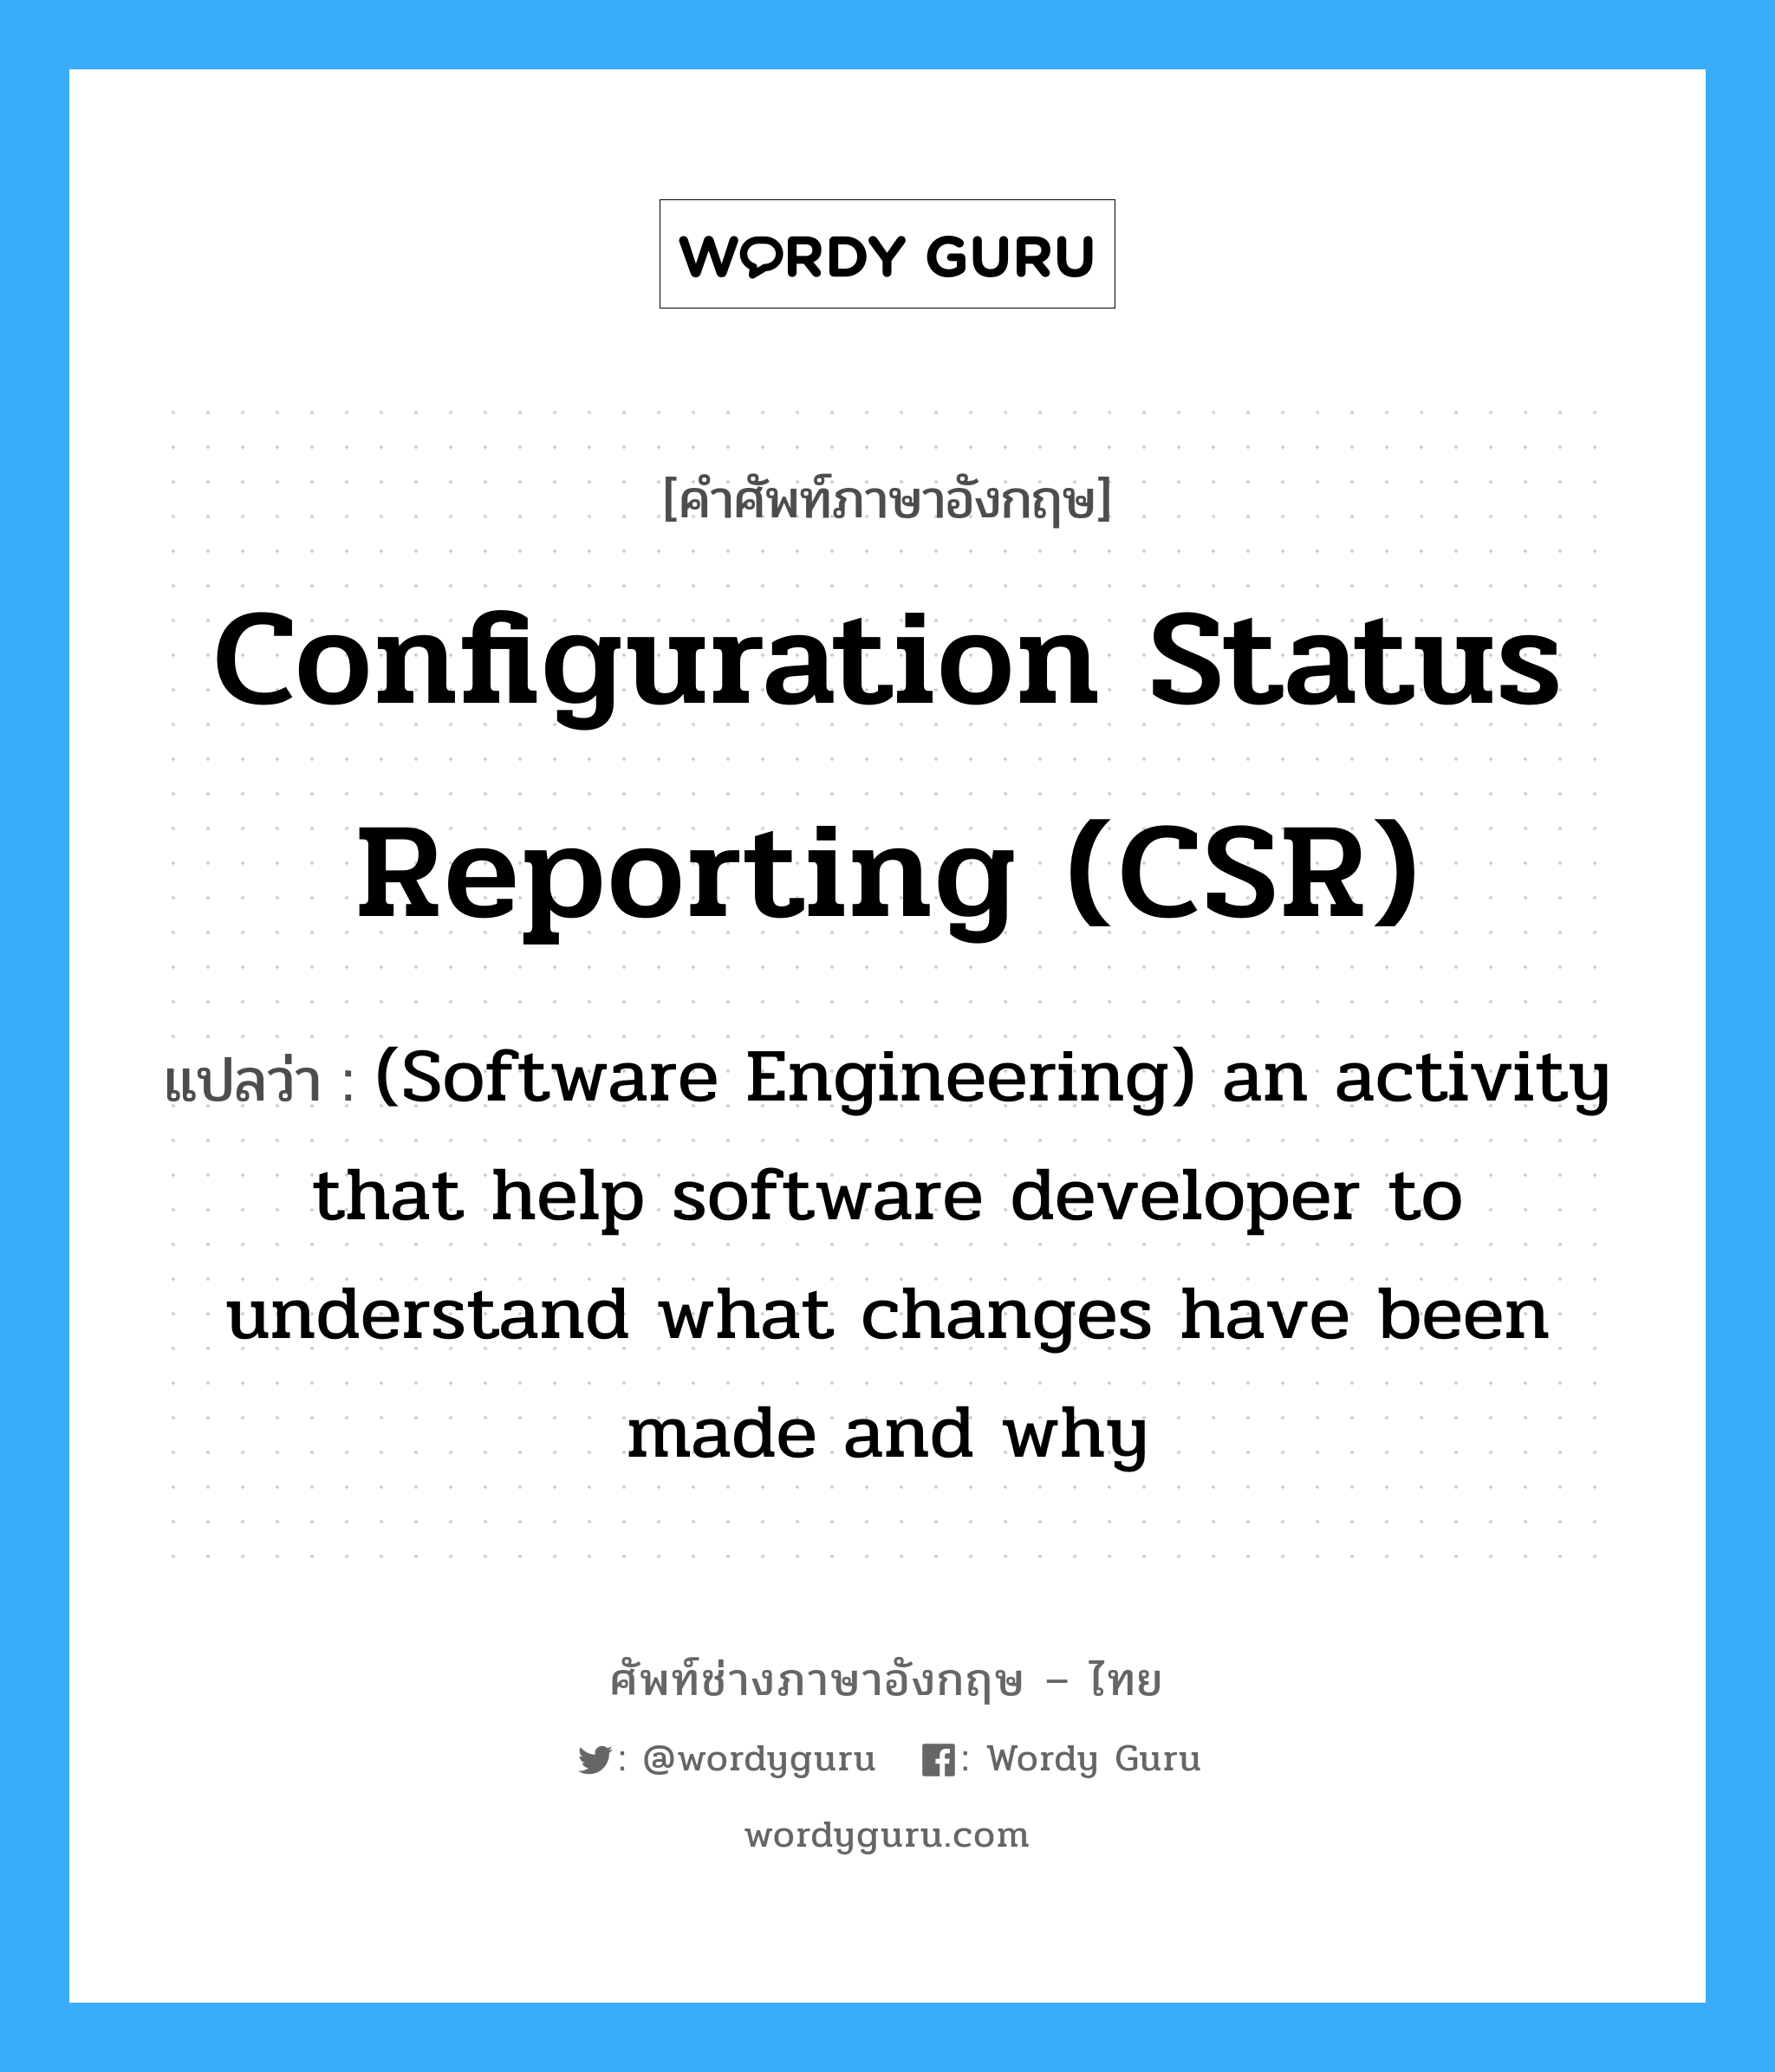 Configuration status reporting (CSR) แปลว่า?, คำศัพท์ช่างภาษาอังกฤษ - ไทย Configuration status reporting (CSR) คำศัพท์ภาษาอังกฤษ Configuration status reporting (CSR) แปลว่า (Software Engineering) an activity that help software developer to understand what changes have been made and why